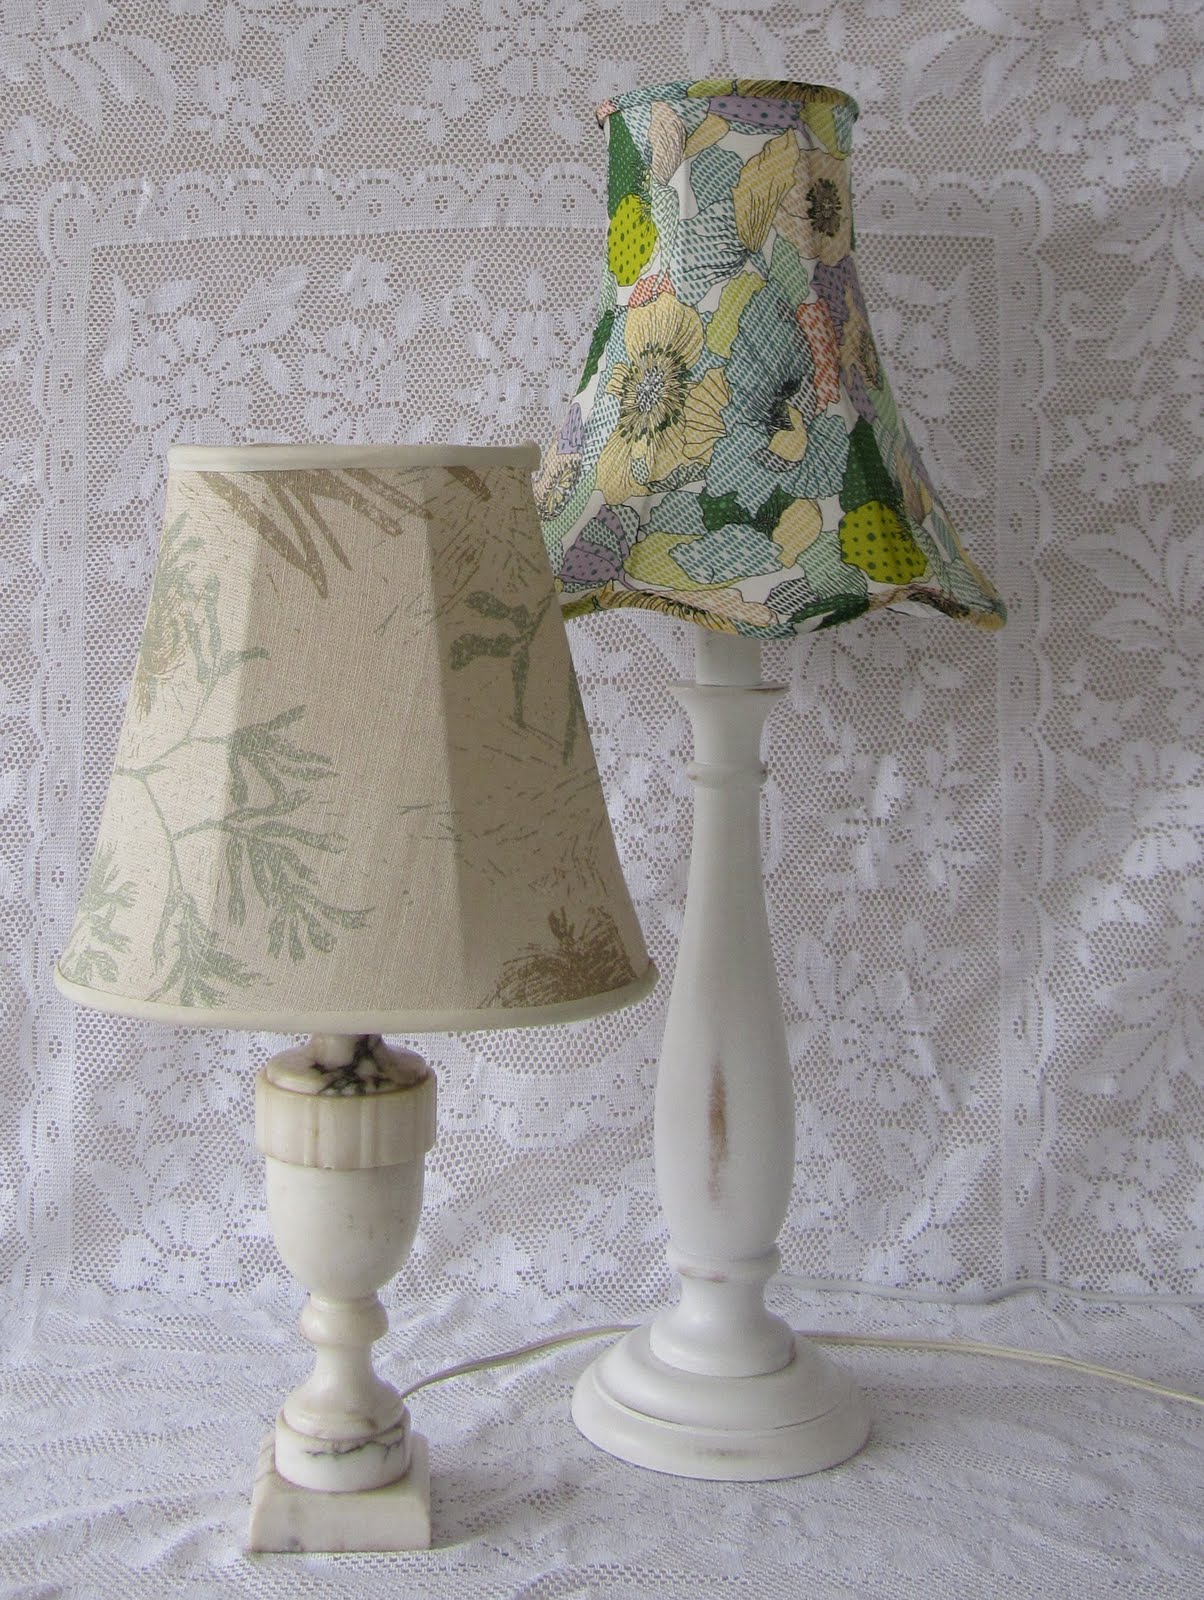 Lampshade Tutorial, How To Recover Fabric Lampshade